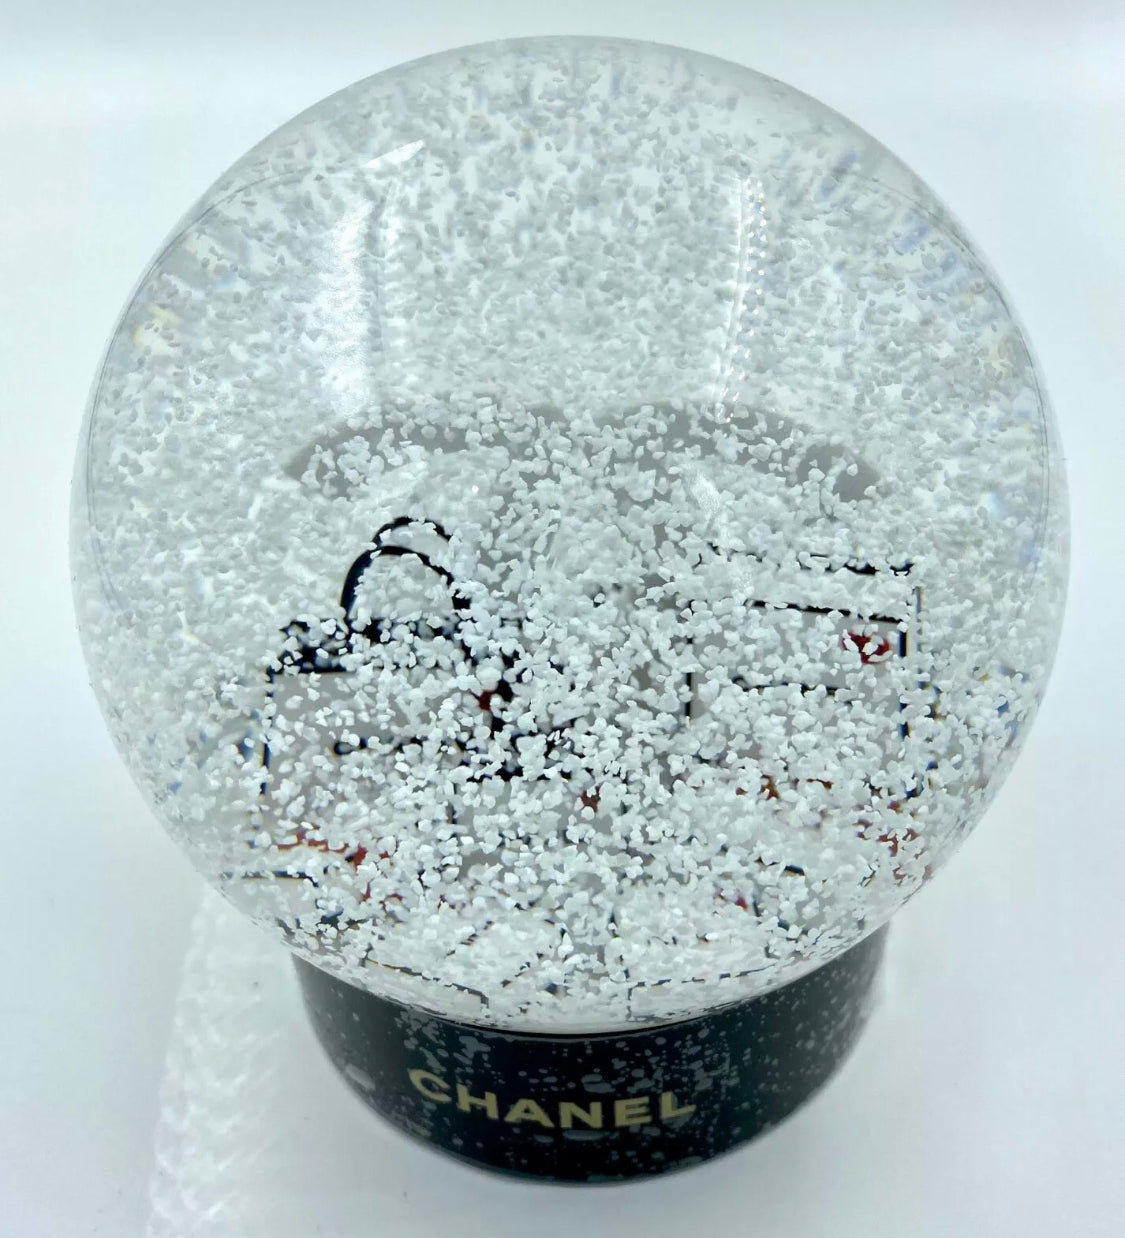 Chanel n°5 Limited Edition snow ball collector - Katheley's